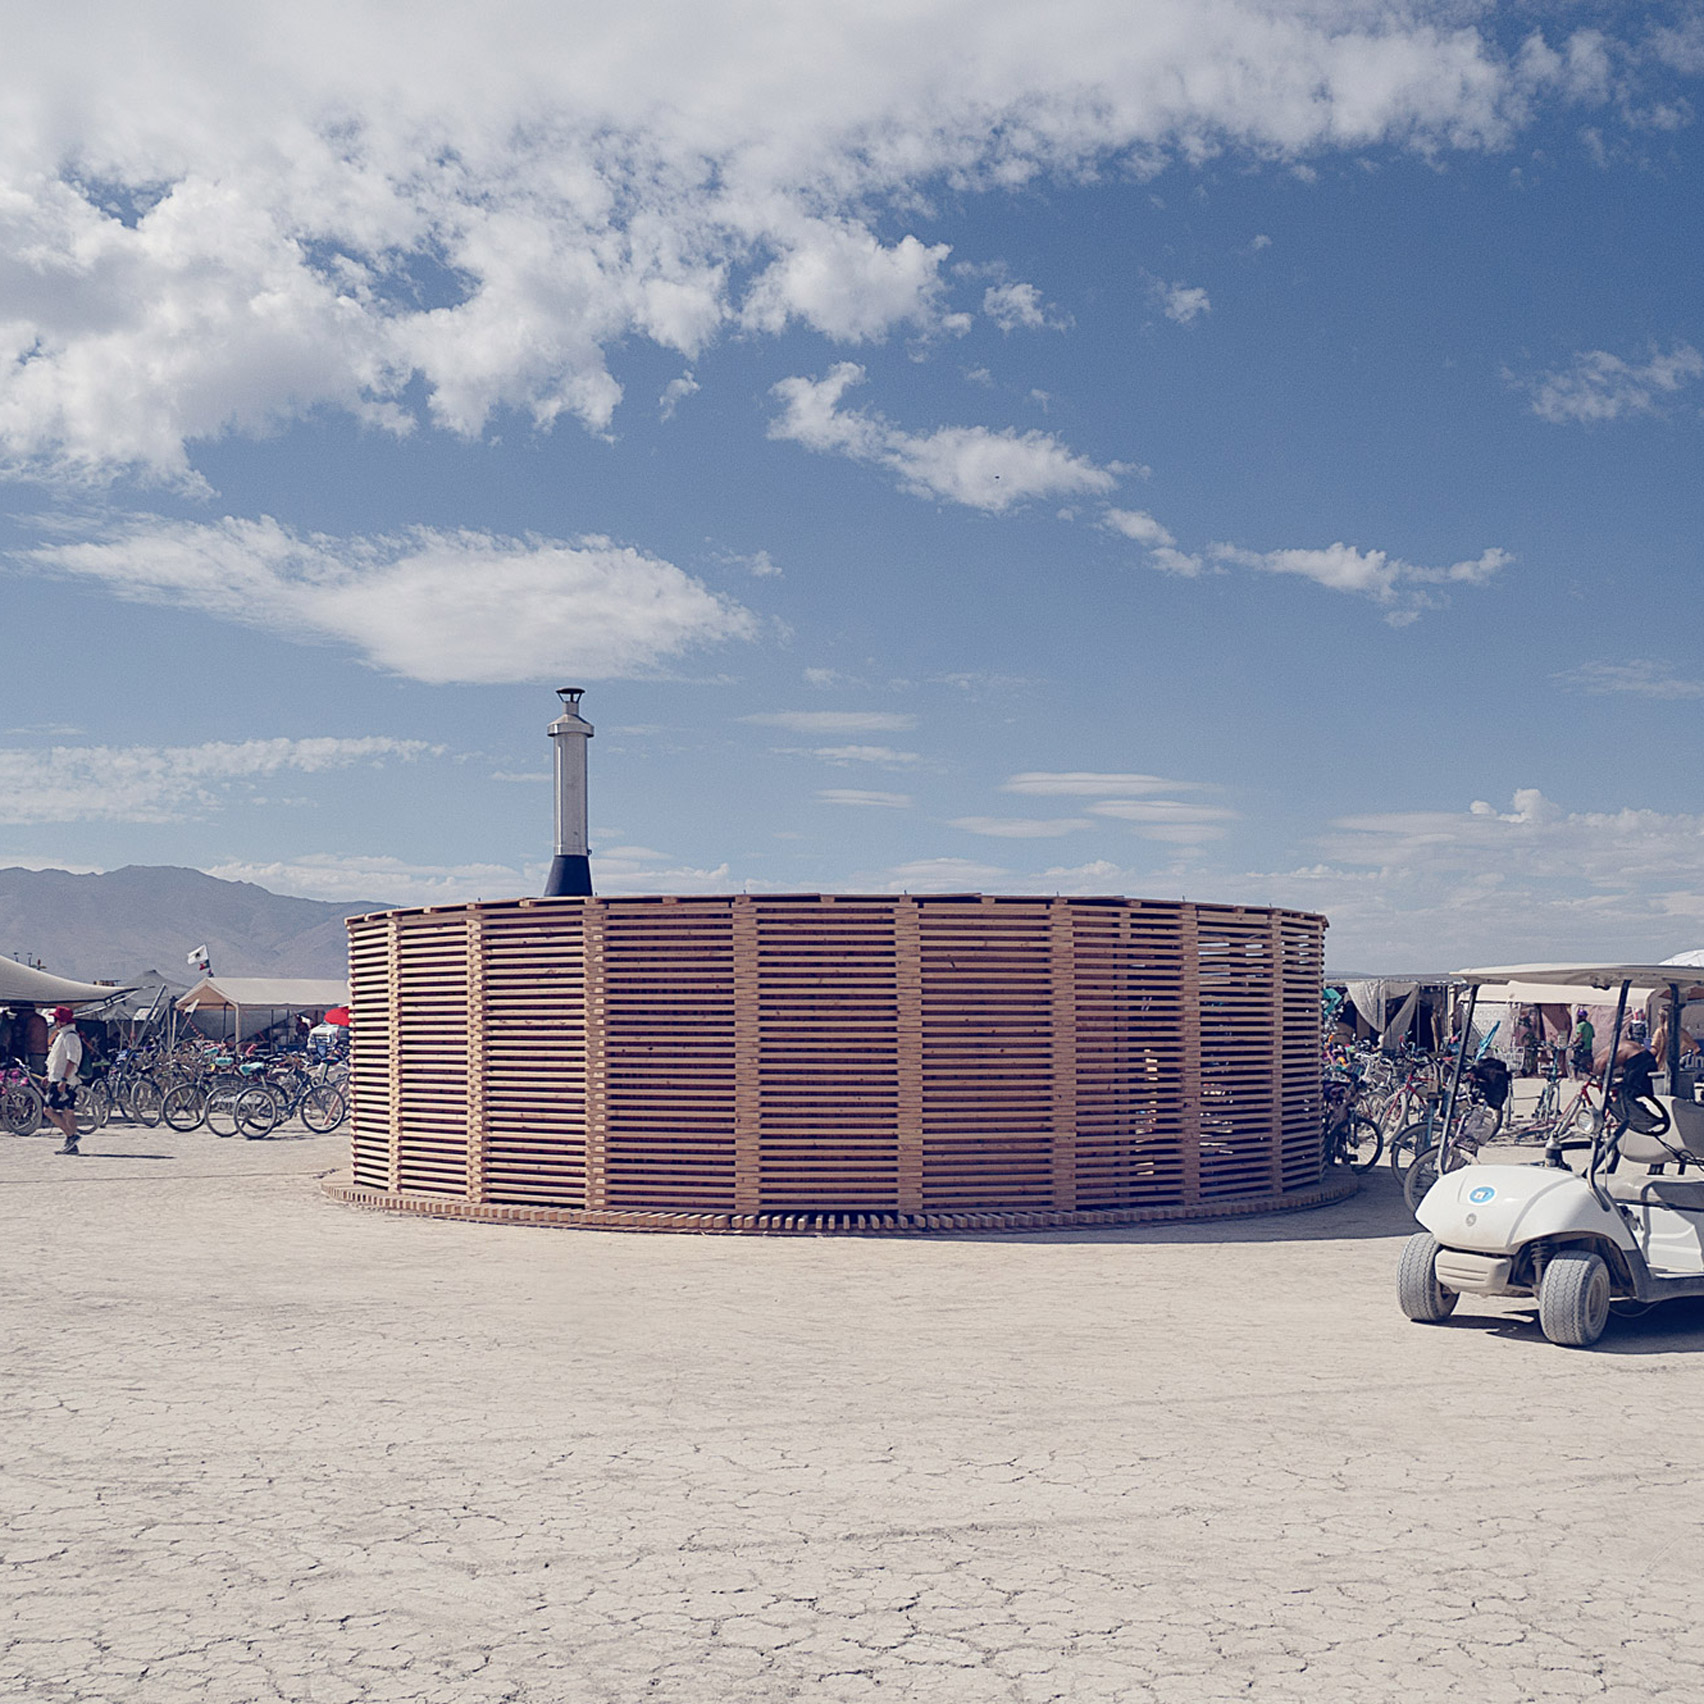 Bringing a sauna to Burning Man was so mad we had to do it